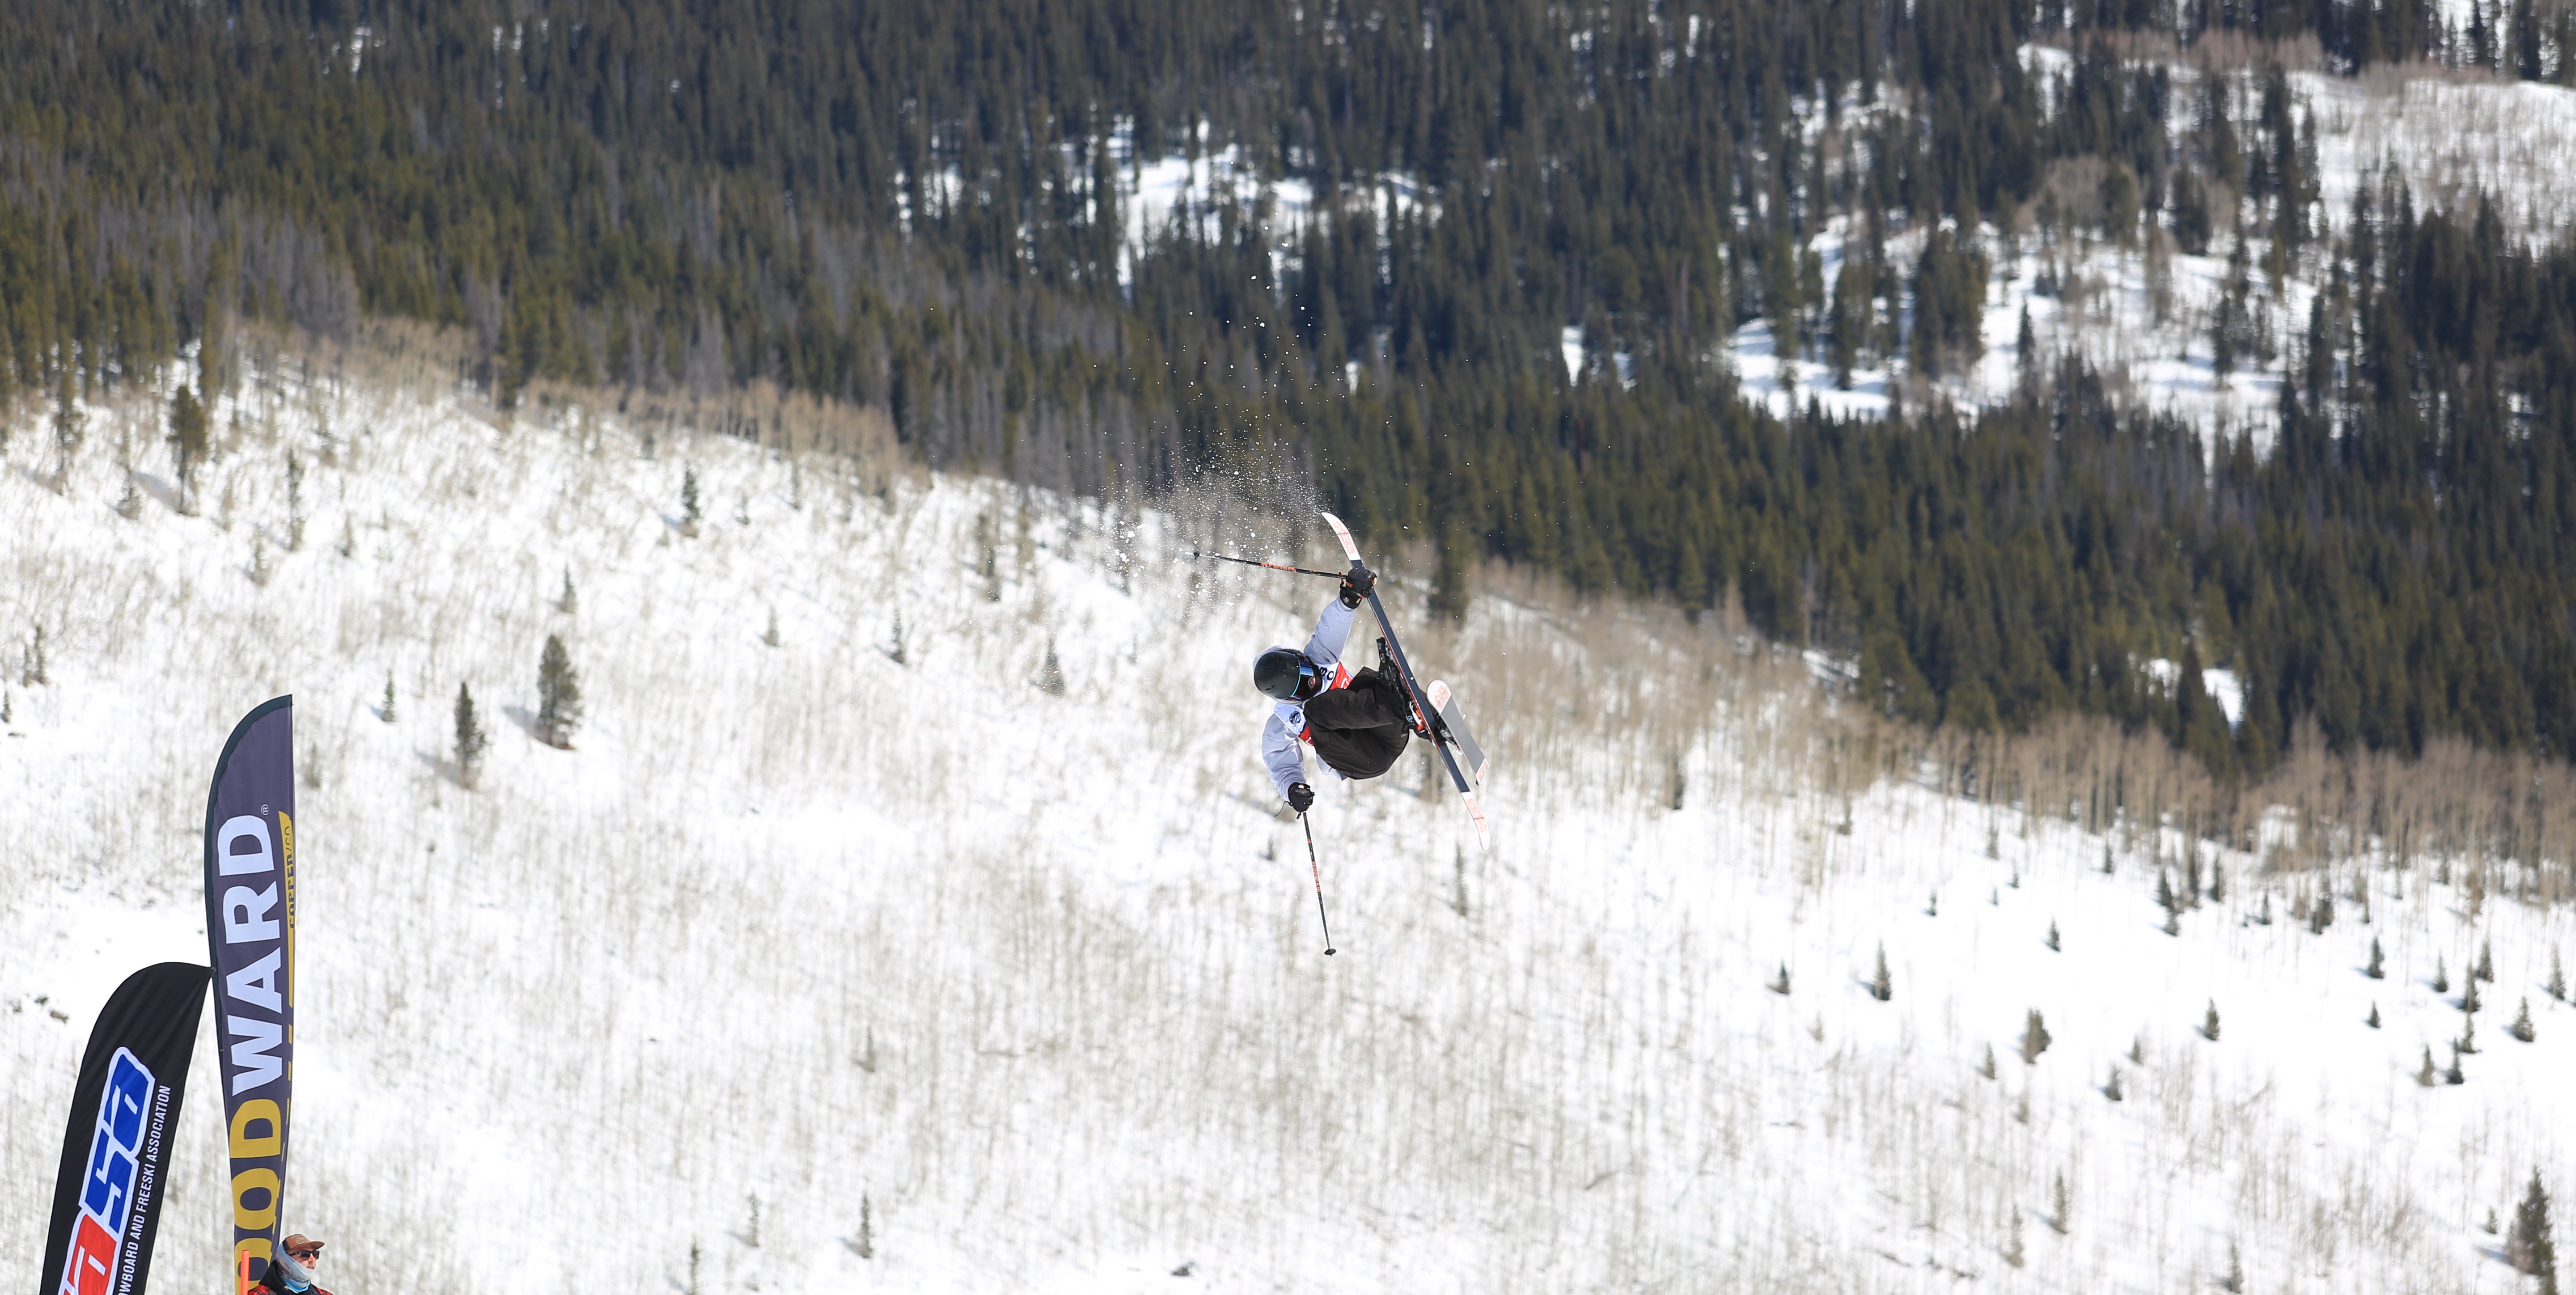 Emerson Lawton airborne at Copper Mountain for the 2019 USASA Nationals slopestyle open class competition. (Chad Buchholz - USASA)